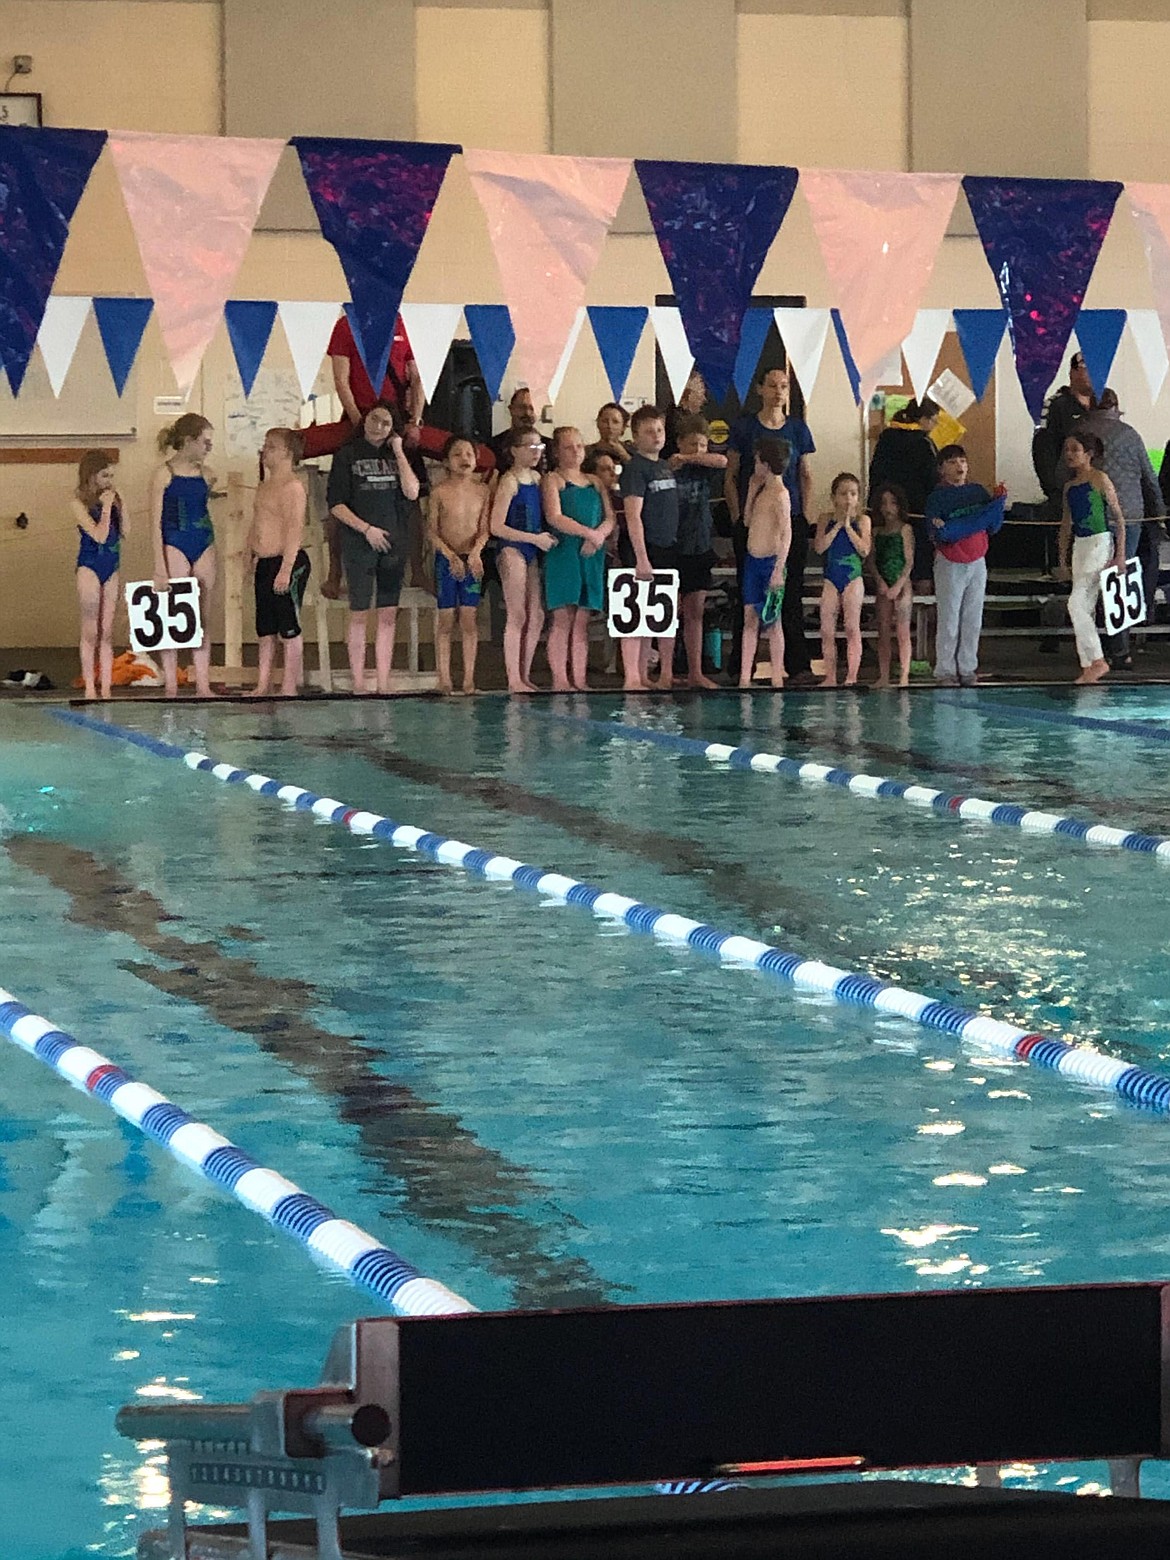 The Lake Monster's Swim Team cheering on their mile racers. (Photo provided by coach Shayna Swanson)